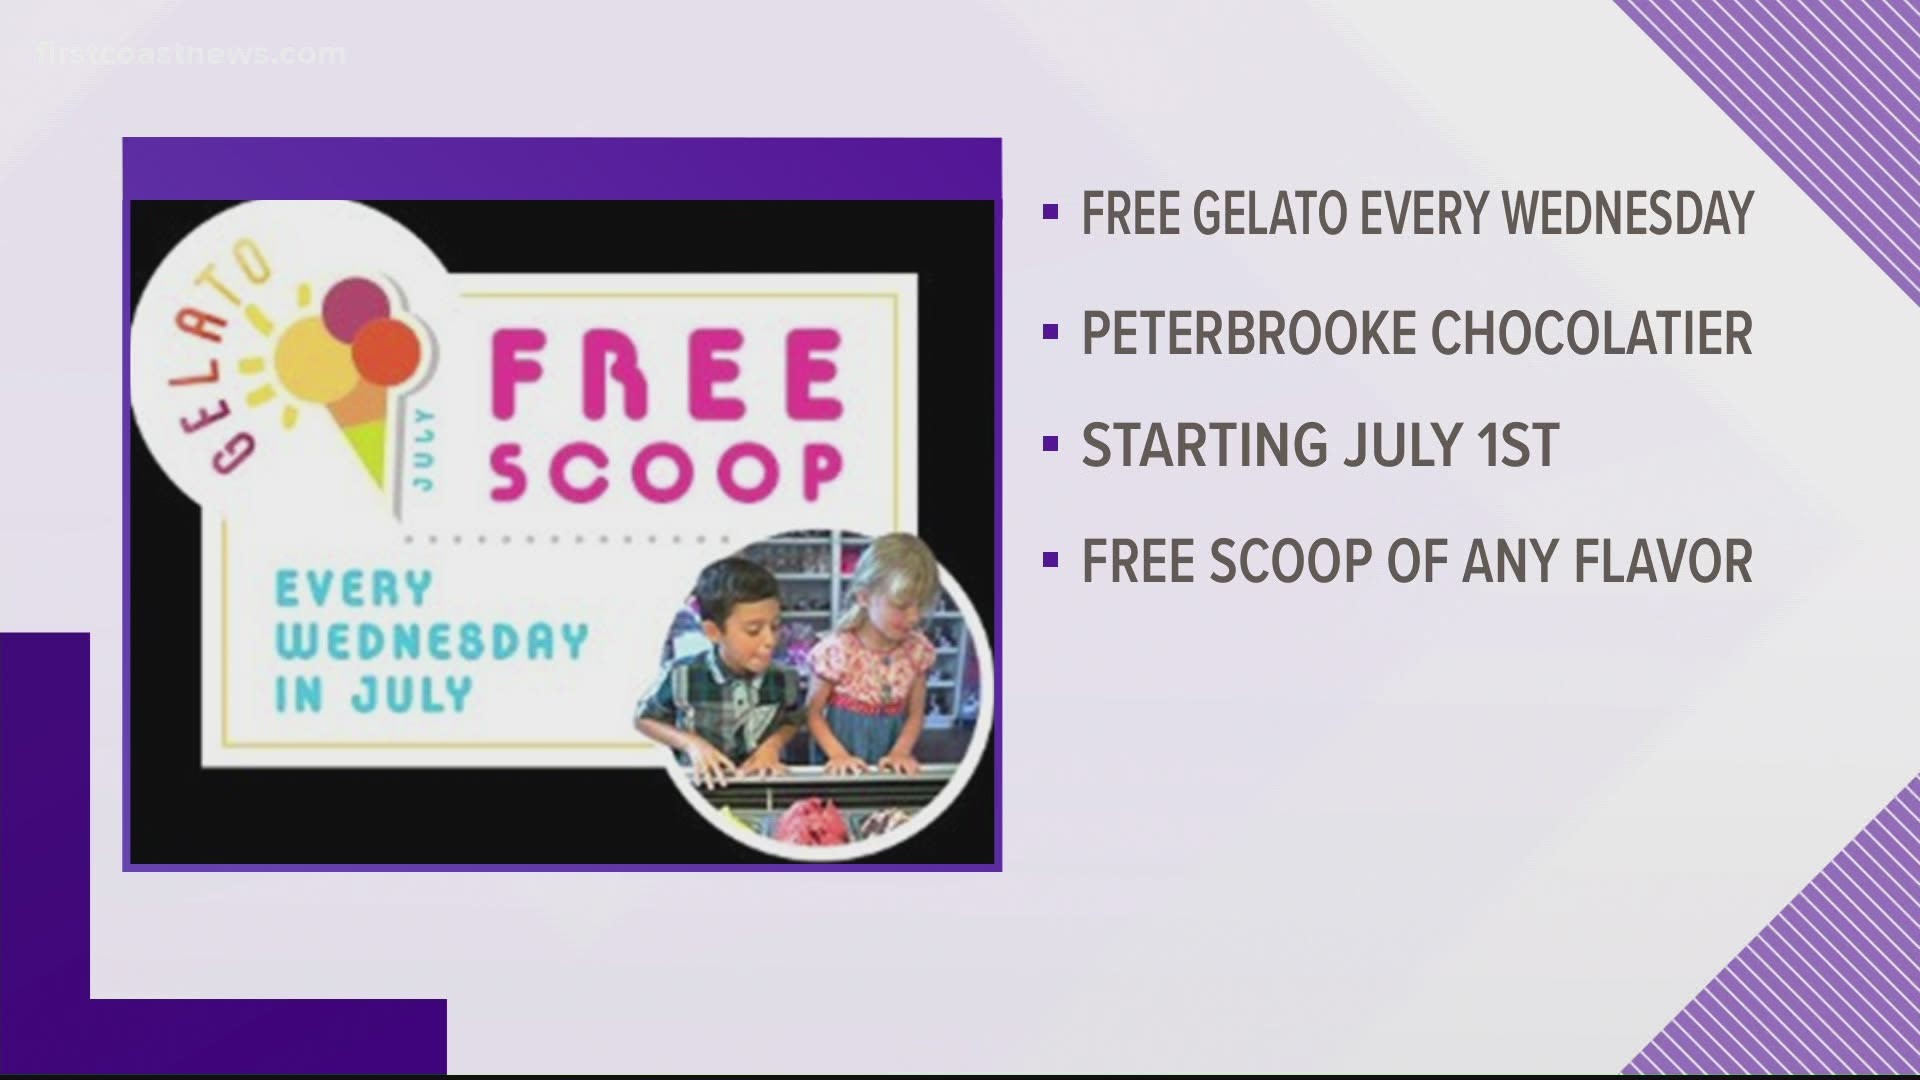 You can get a free scoop of any flavor of gelato every Wednesday in July.